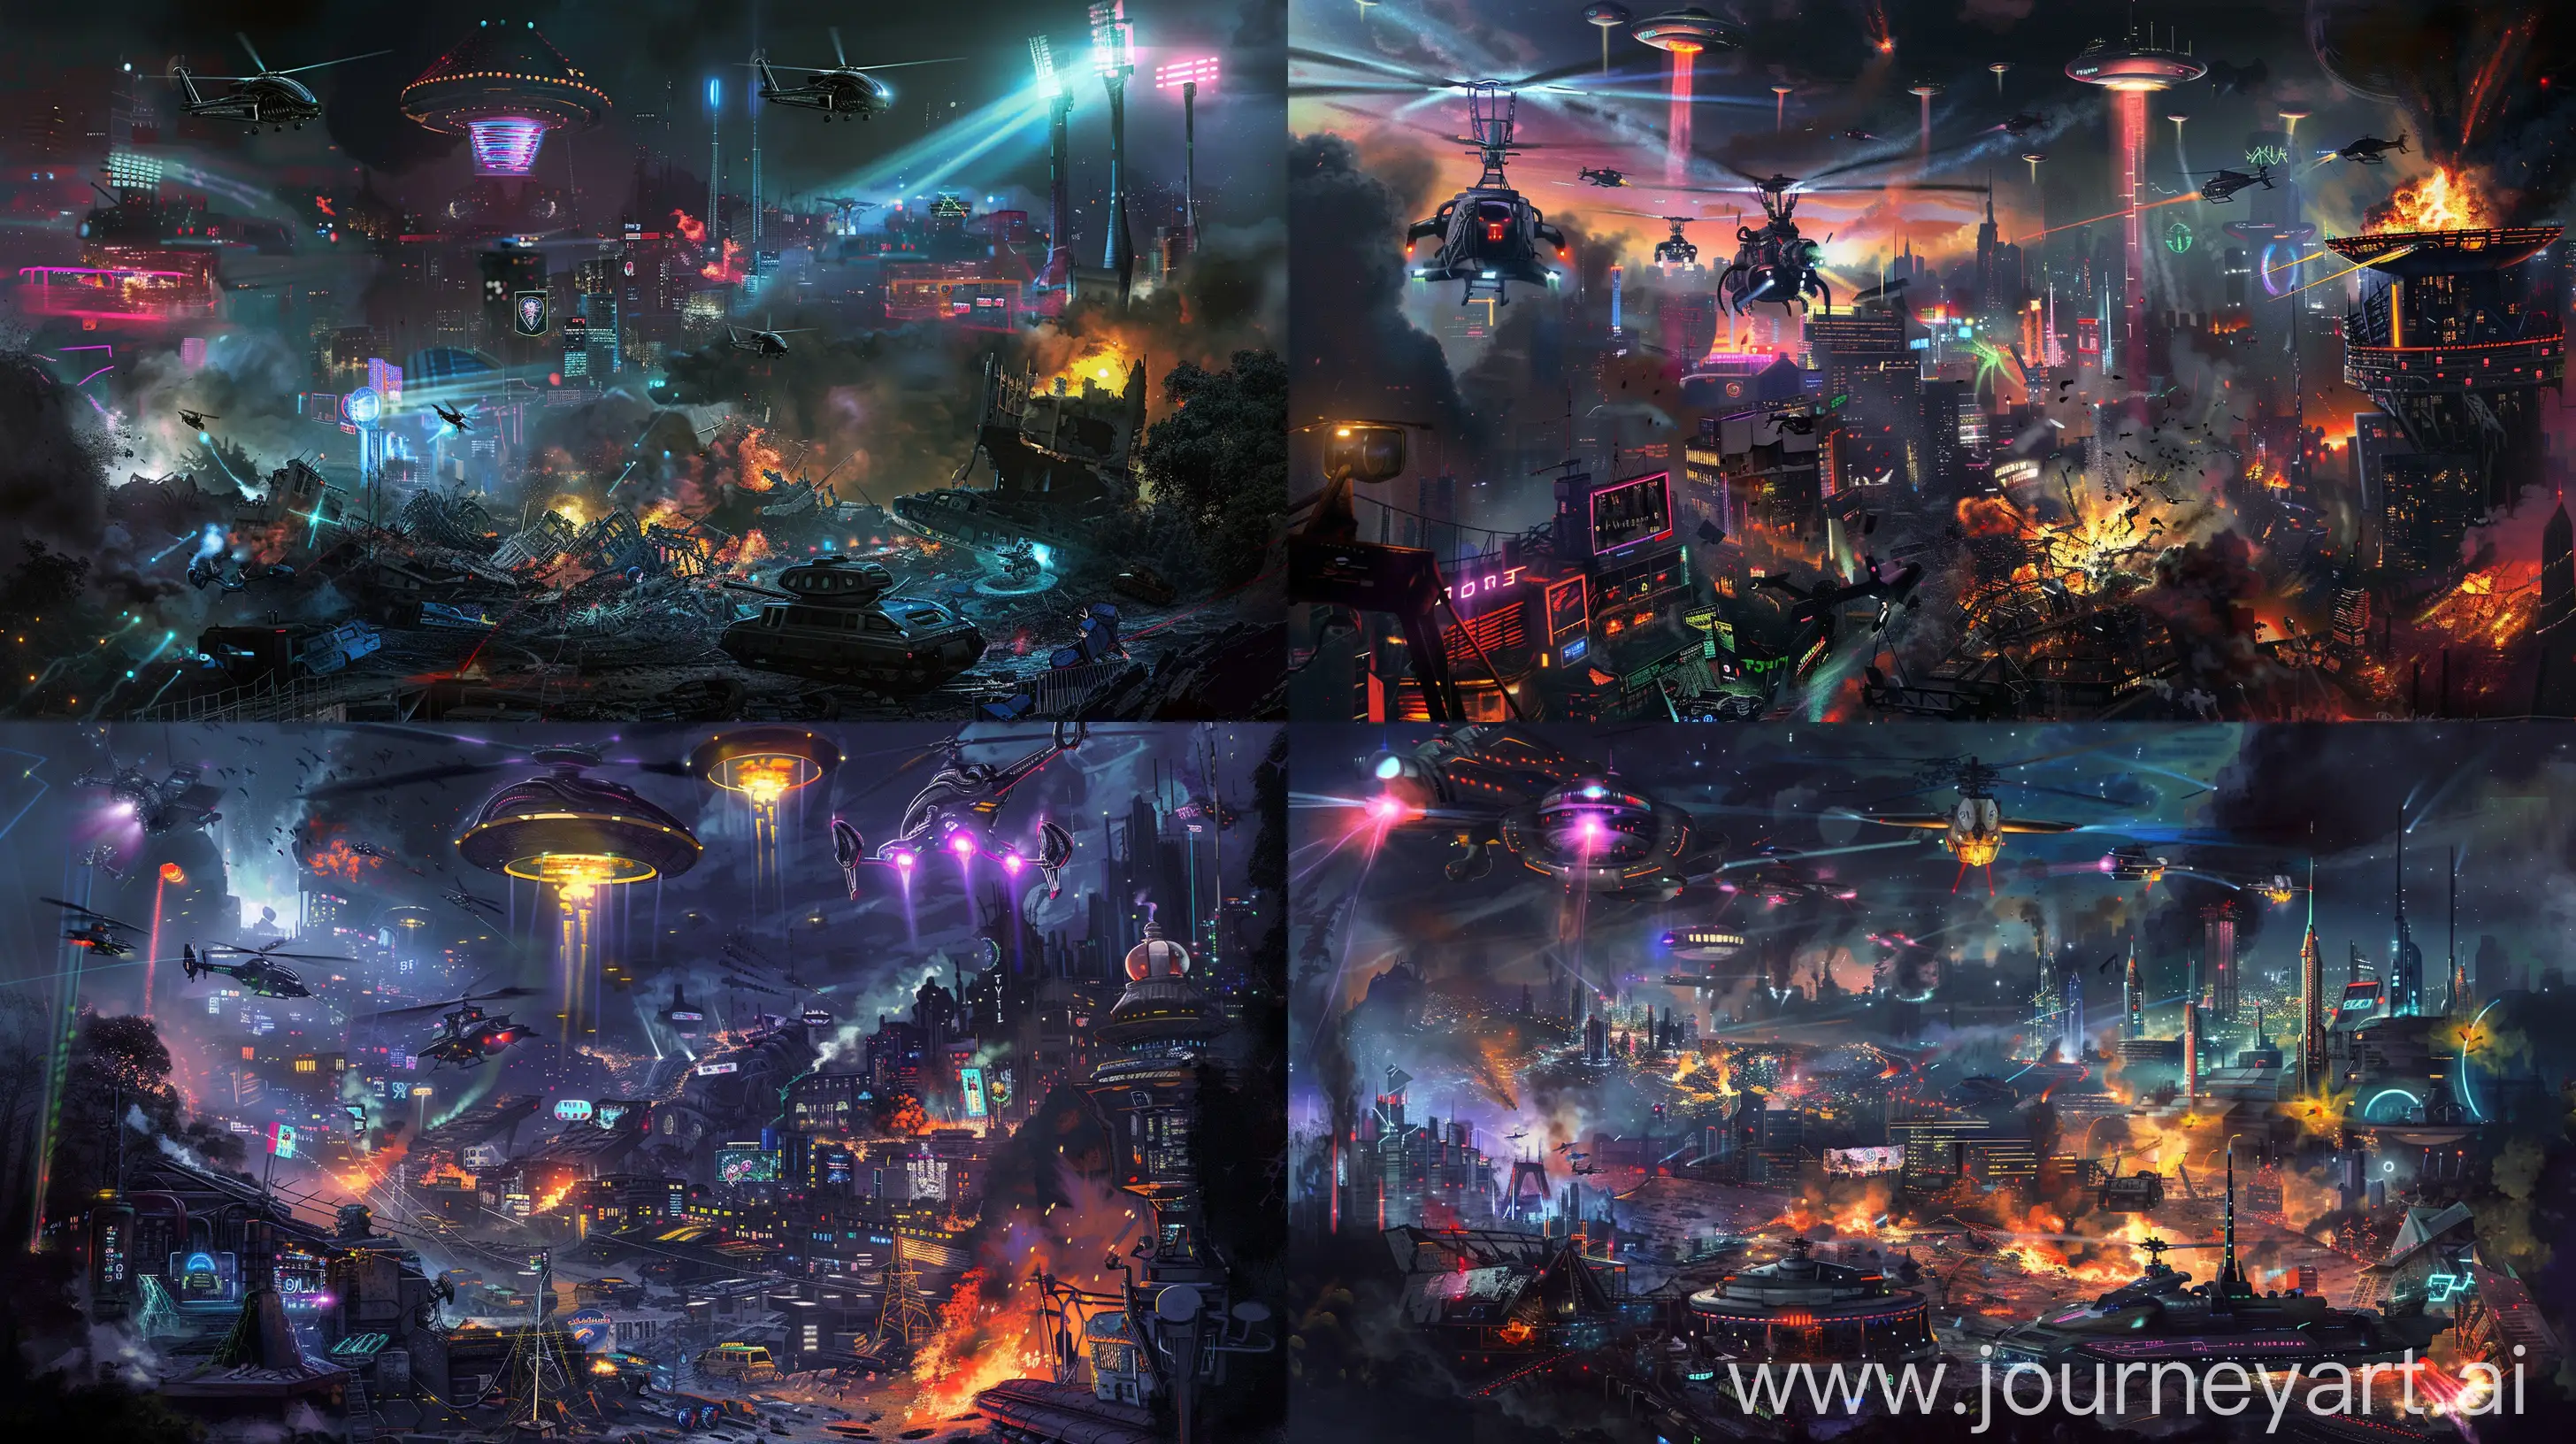 Dramatic-Alien-Invasion-of-Futuristic-Night-Cityscape-with-Human-Resistance